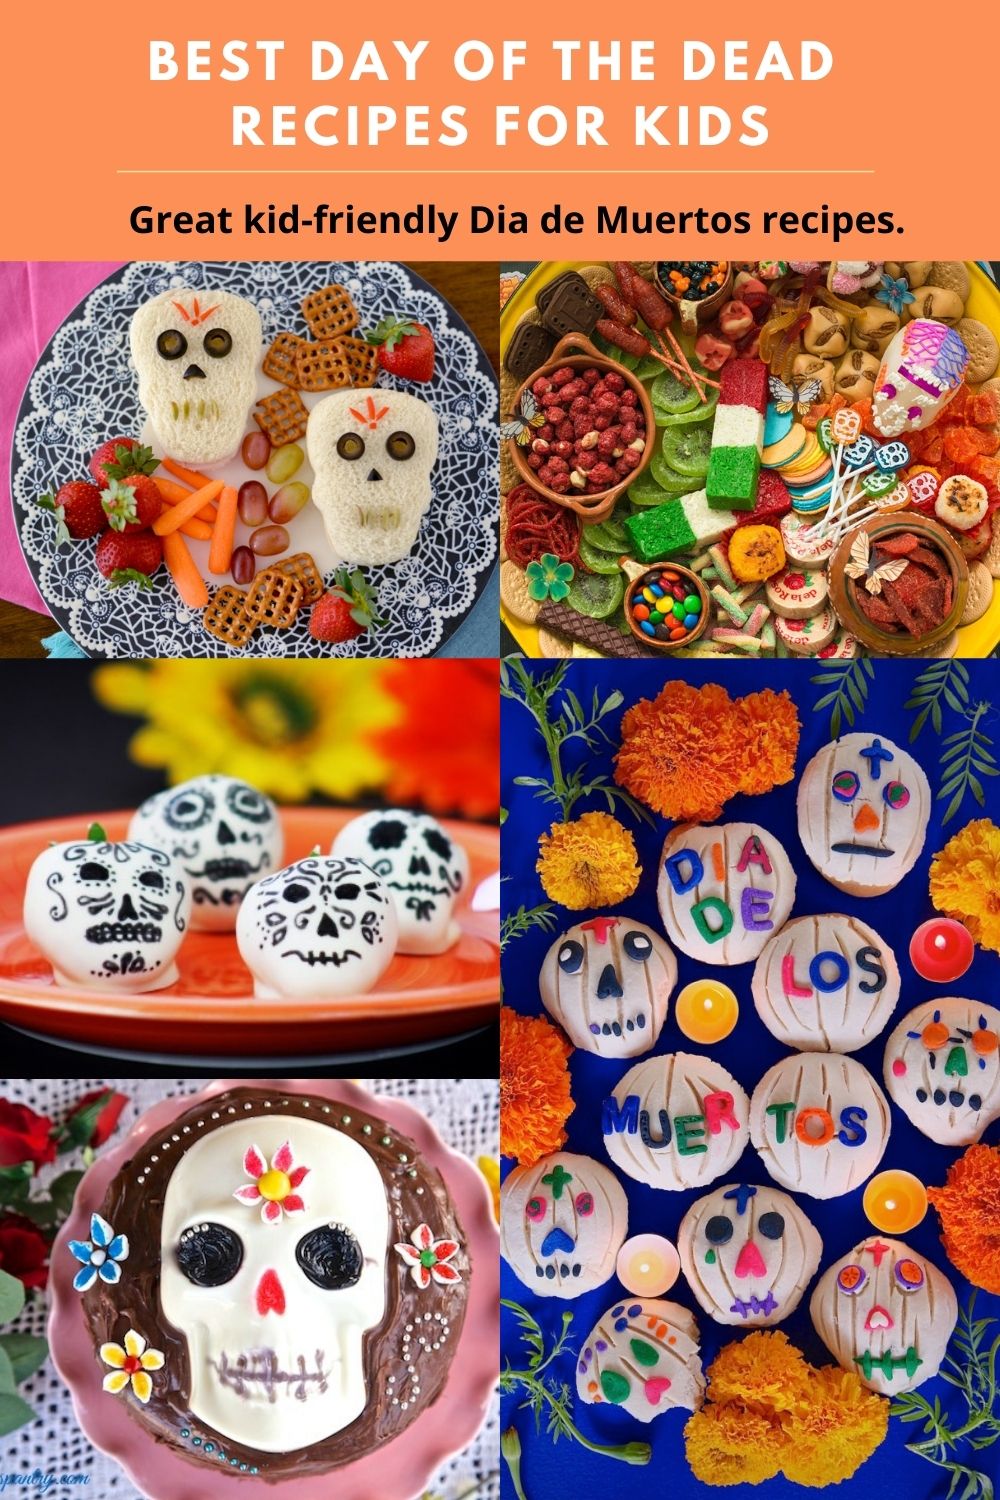 Best Day of the Dead recipes for kids